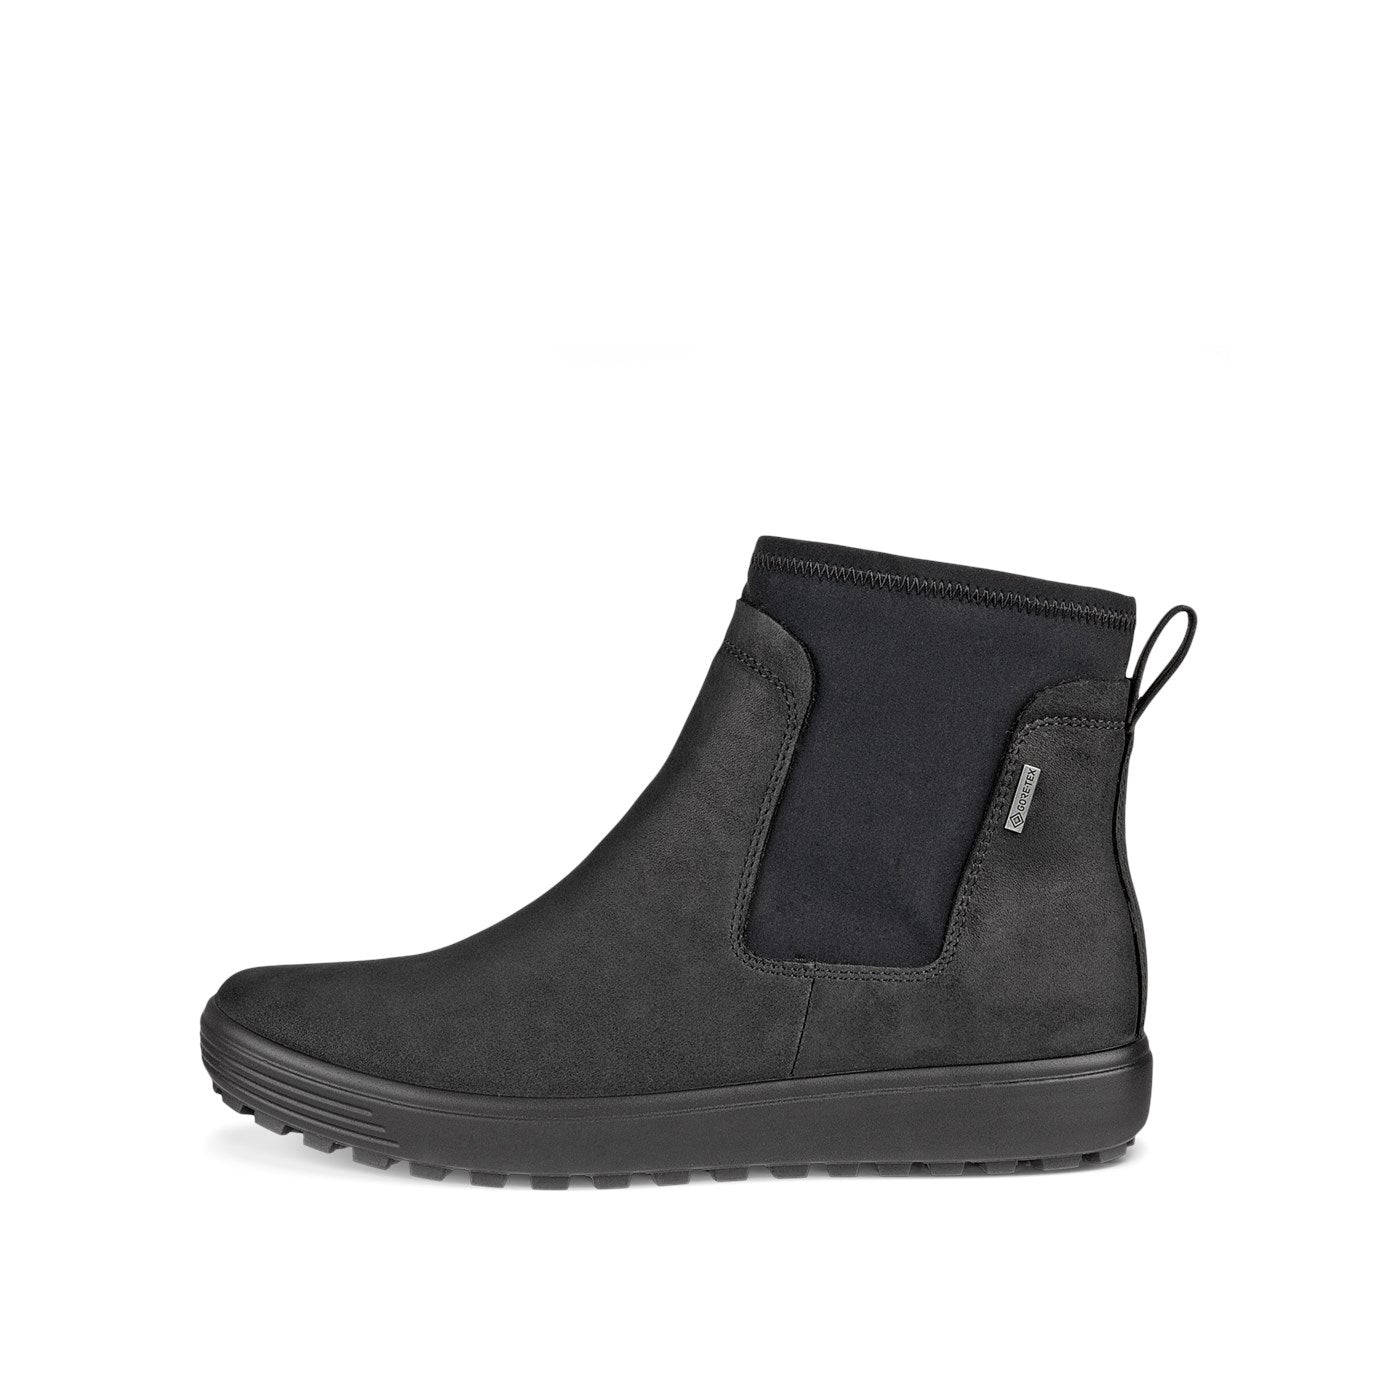 SOFT 7 TRED W GTX ANKLE BOOT - HERE